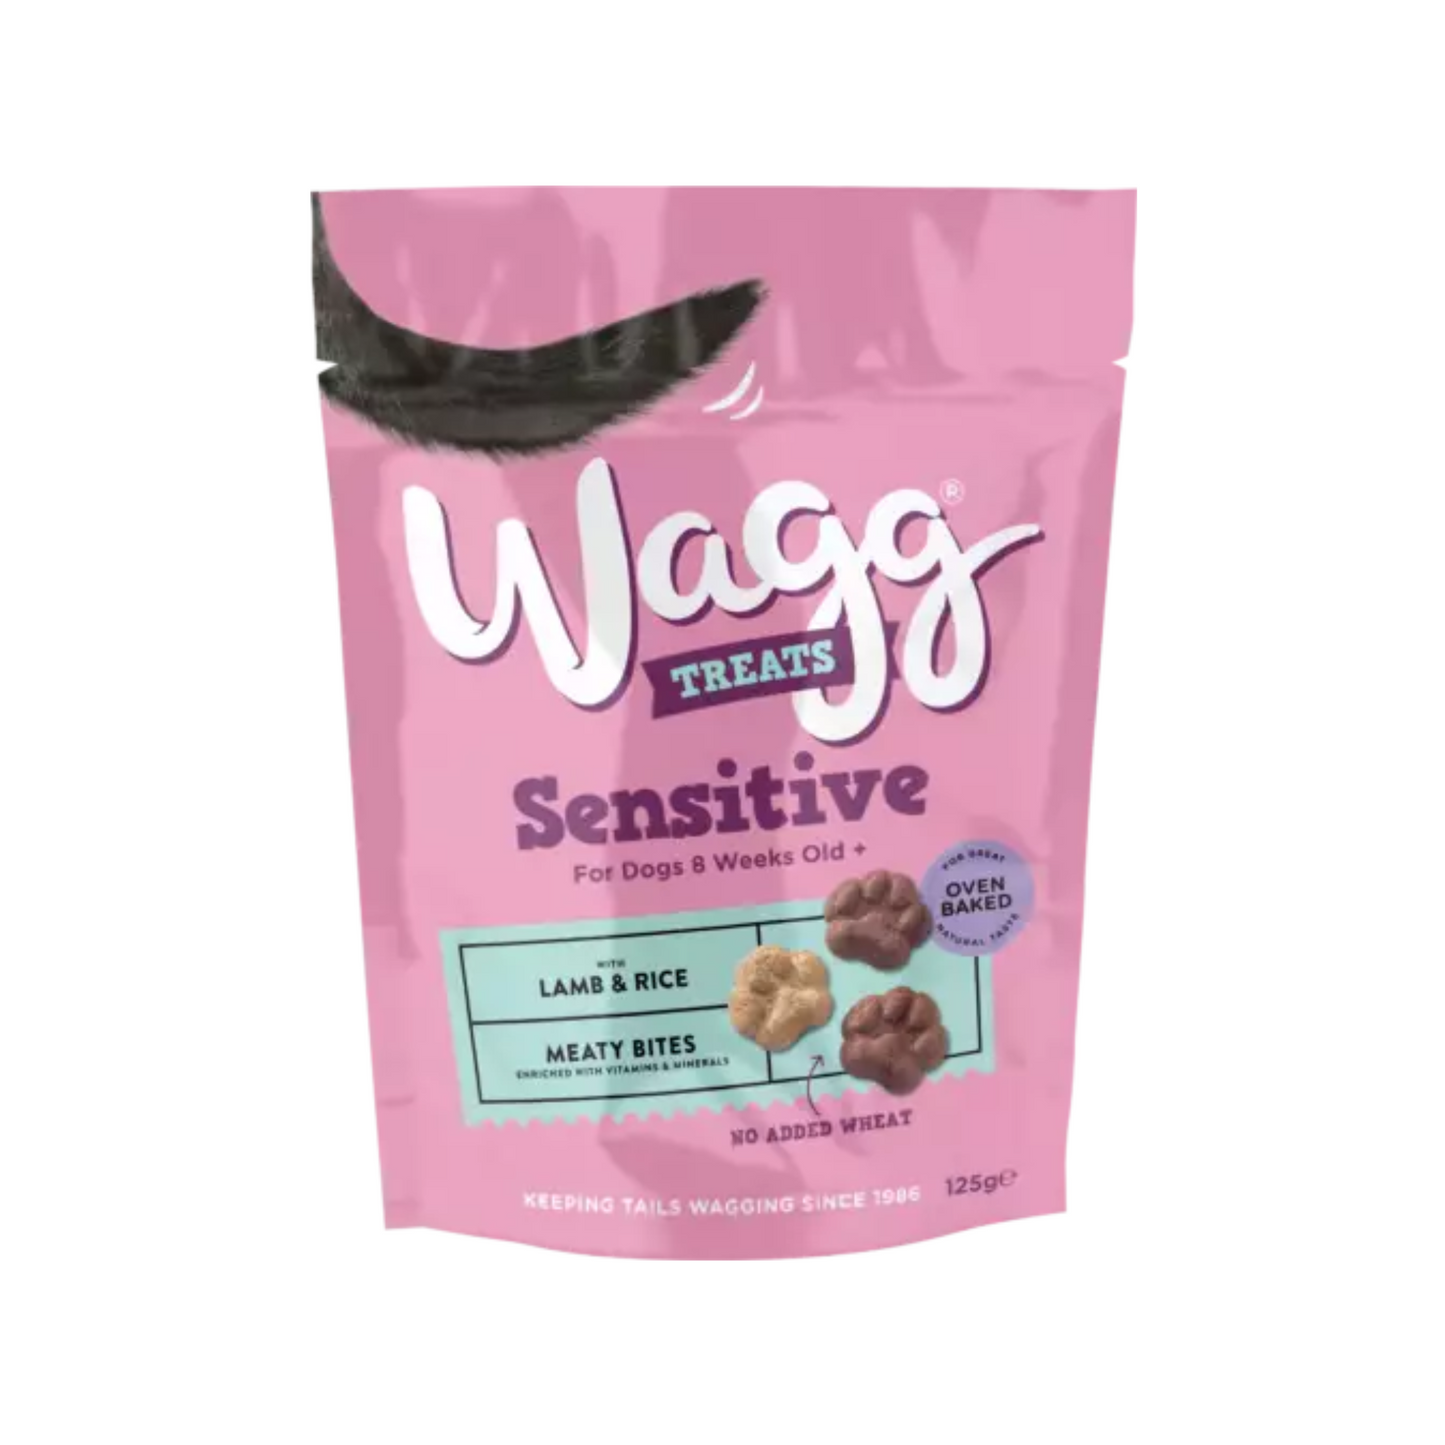 Wagg Sensitive Dog Treats With Easily Digestible Lamb & Rice, Prebiotic To Help Aid Digestion, No Added Wheat Meaty Bites 125g